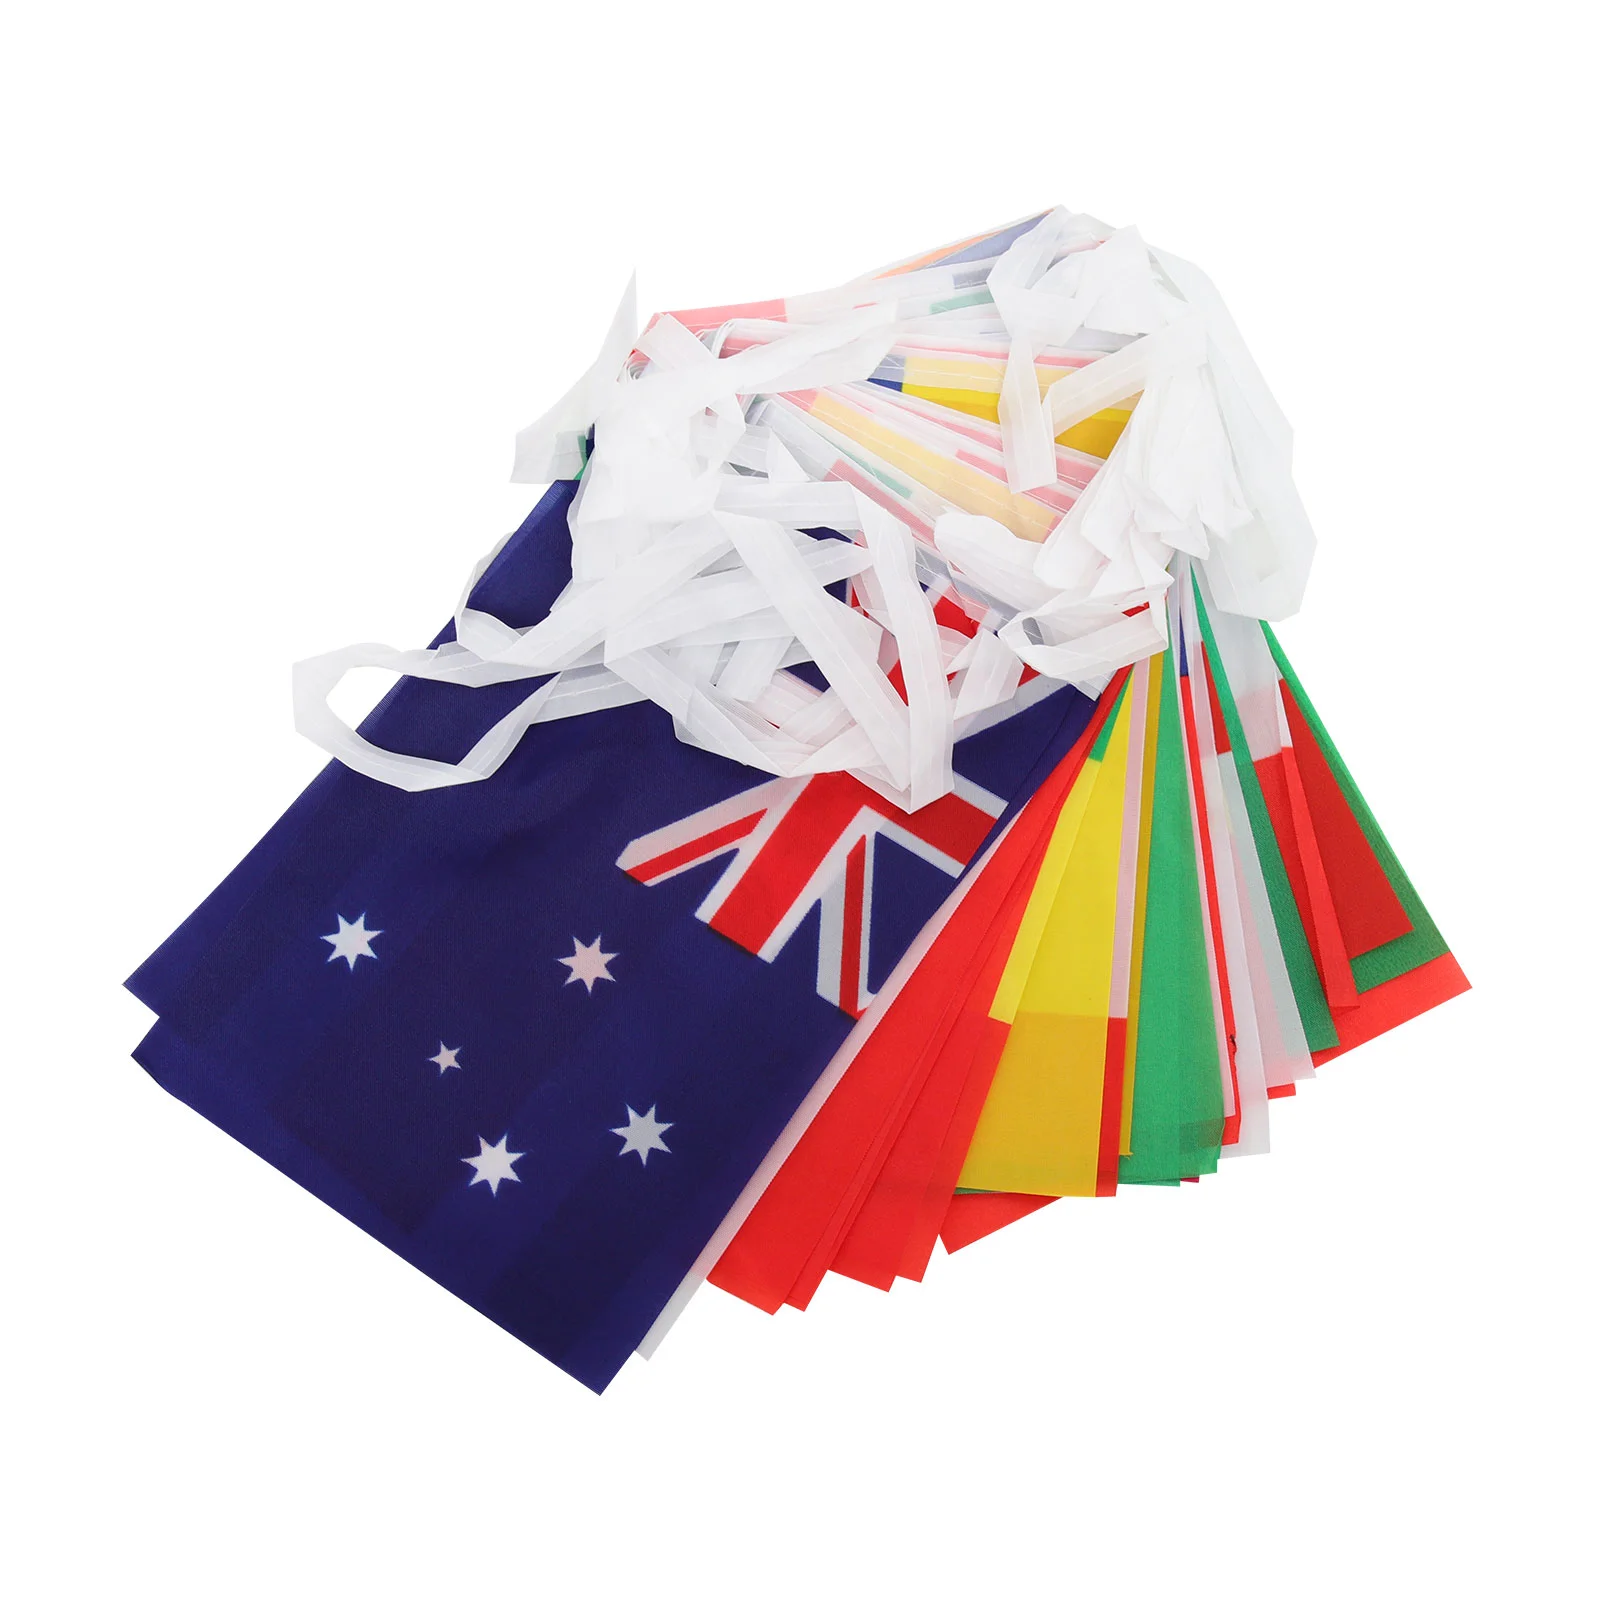 

Flags World Banner Flag Cup International 32 String Decorative Banners Countries Pennant Bunting National Decorations Partythe